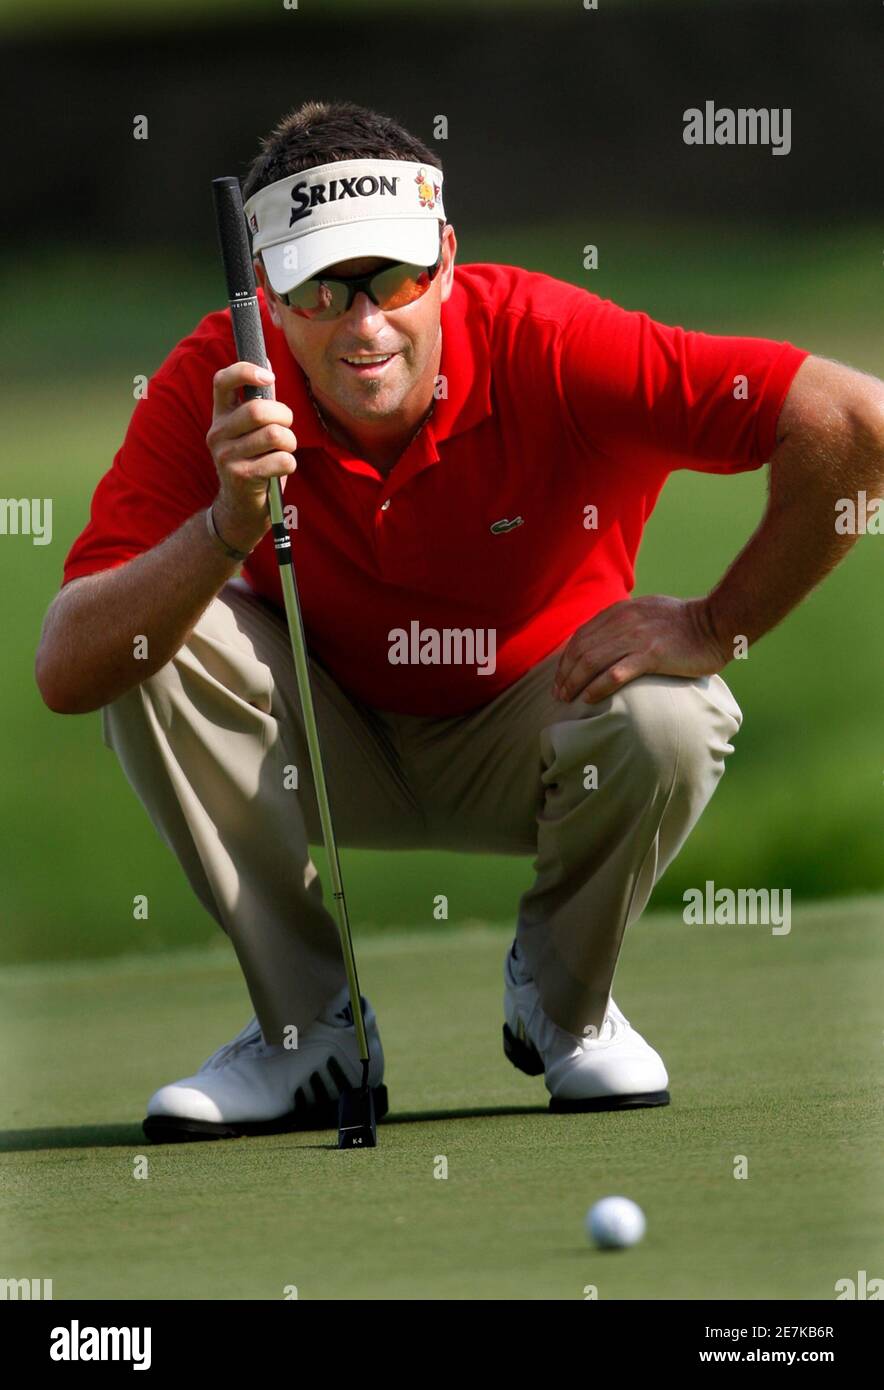 Robert Allenby of Australia lines up his putt on the eighteenth green during the third round of the St. Jude Classic golf tournament at TPC Southwind in Memphis, Tennessee June 13, 2009.   REUTERS/Nikki Boertman    (UNITED STATES SPORT GOLF) Stock Photo